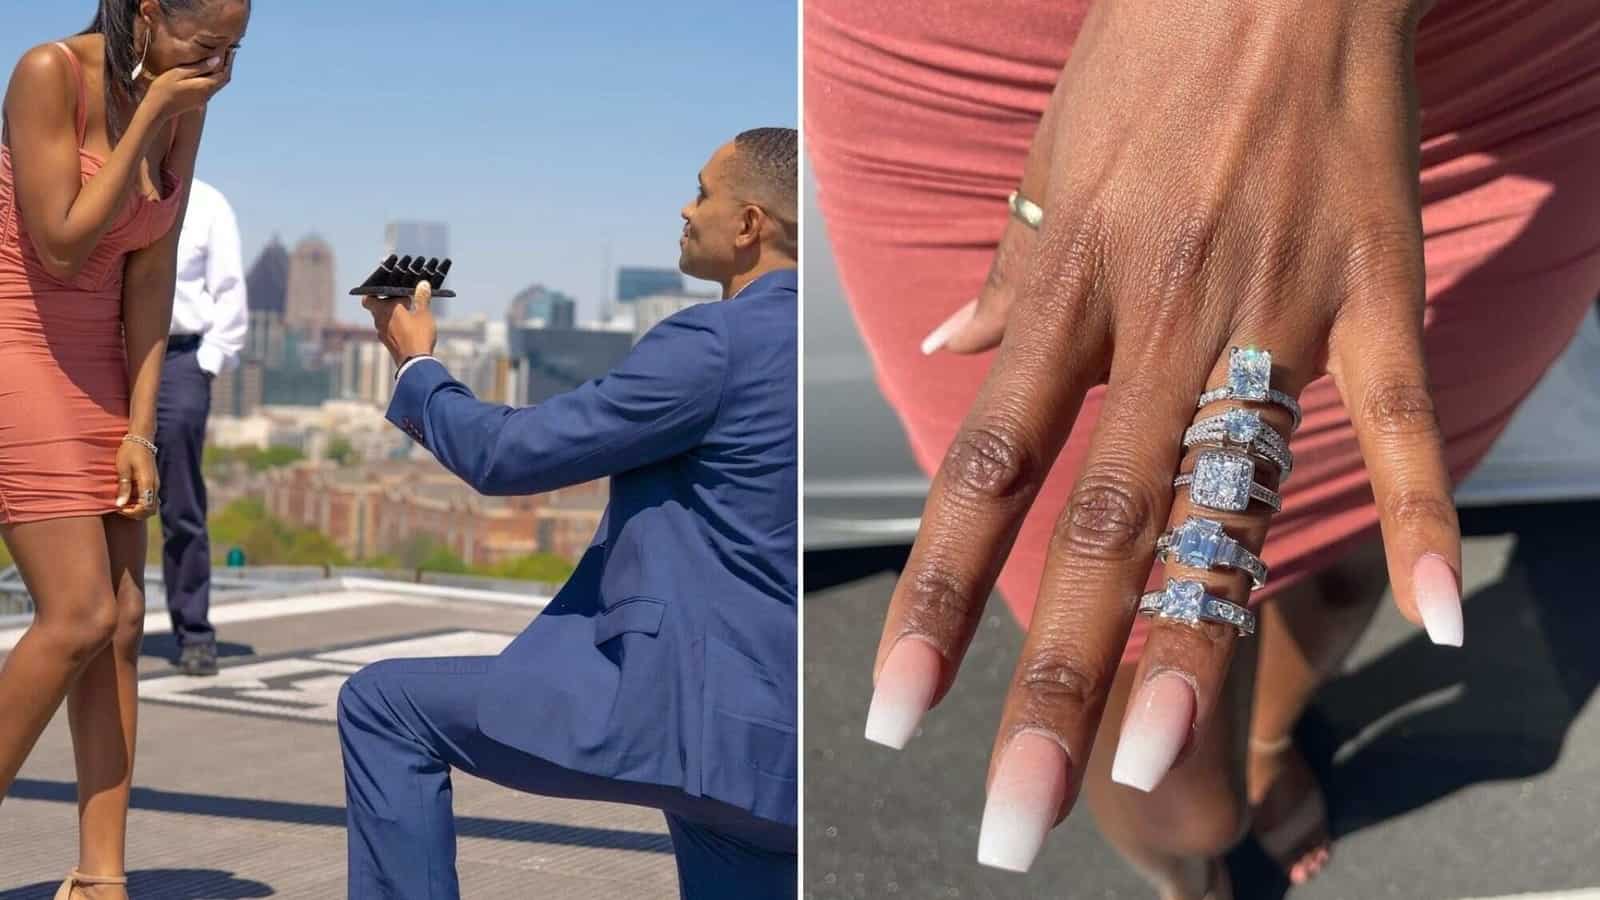 ‘Paps’: Man Proposes To Fiancée With Five Lavish Engagement Rings